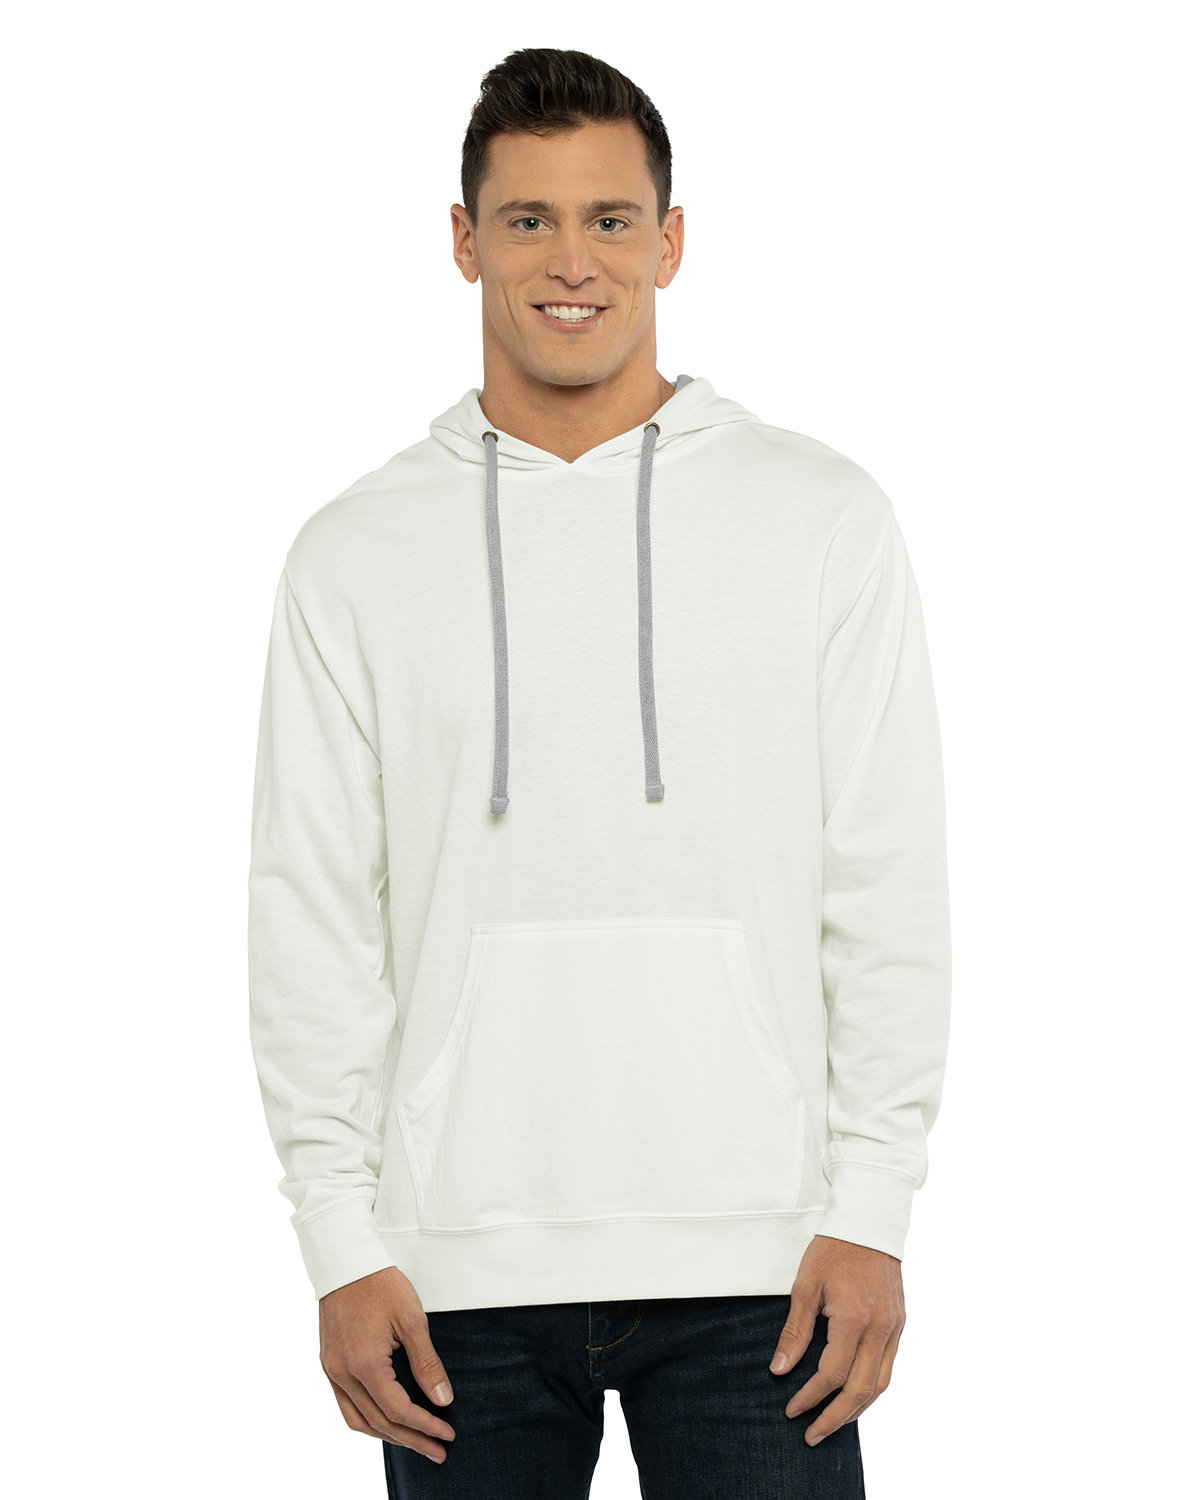 Next Level Apparel Unisex French Terry Pullover Hoodie WHT/ HTHR GRAY 